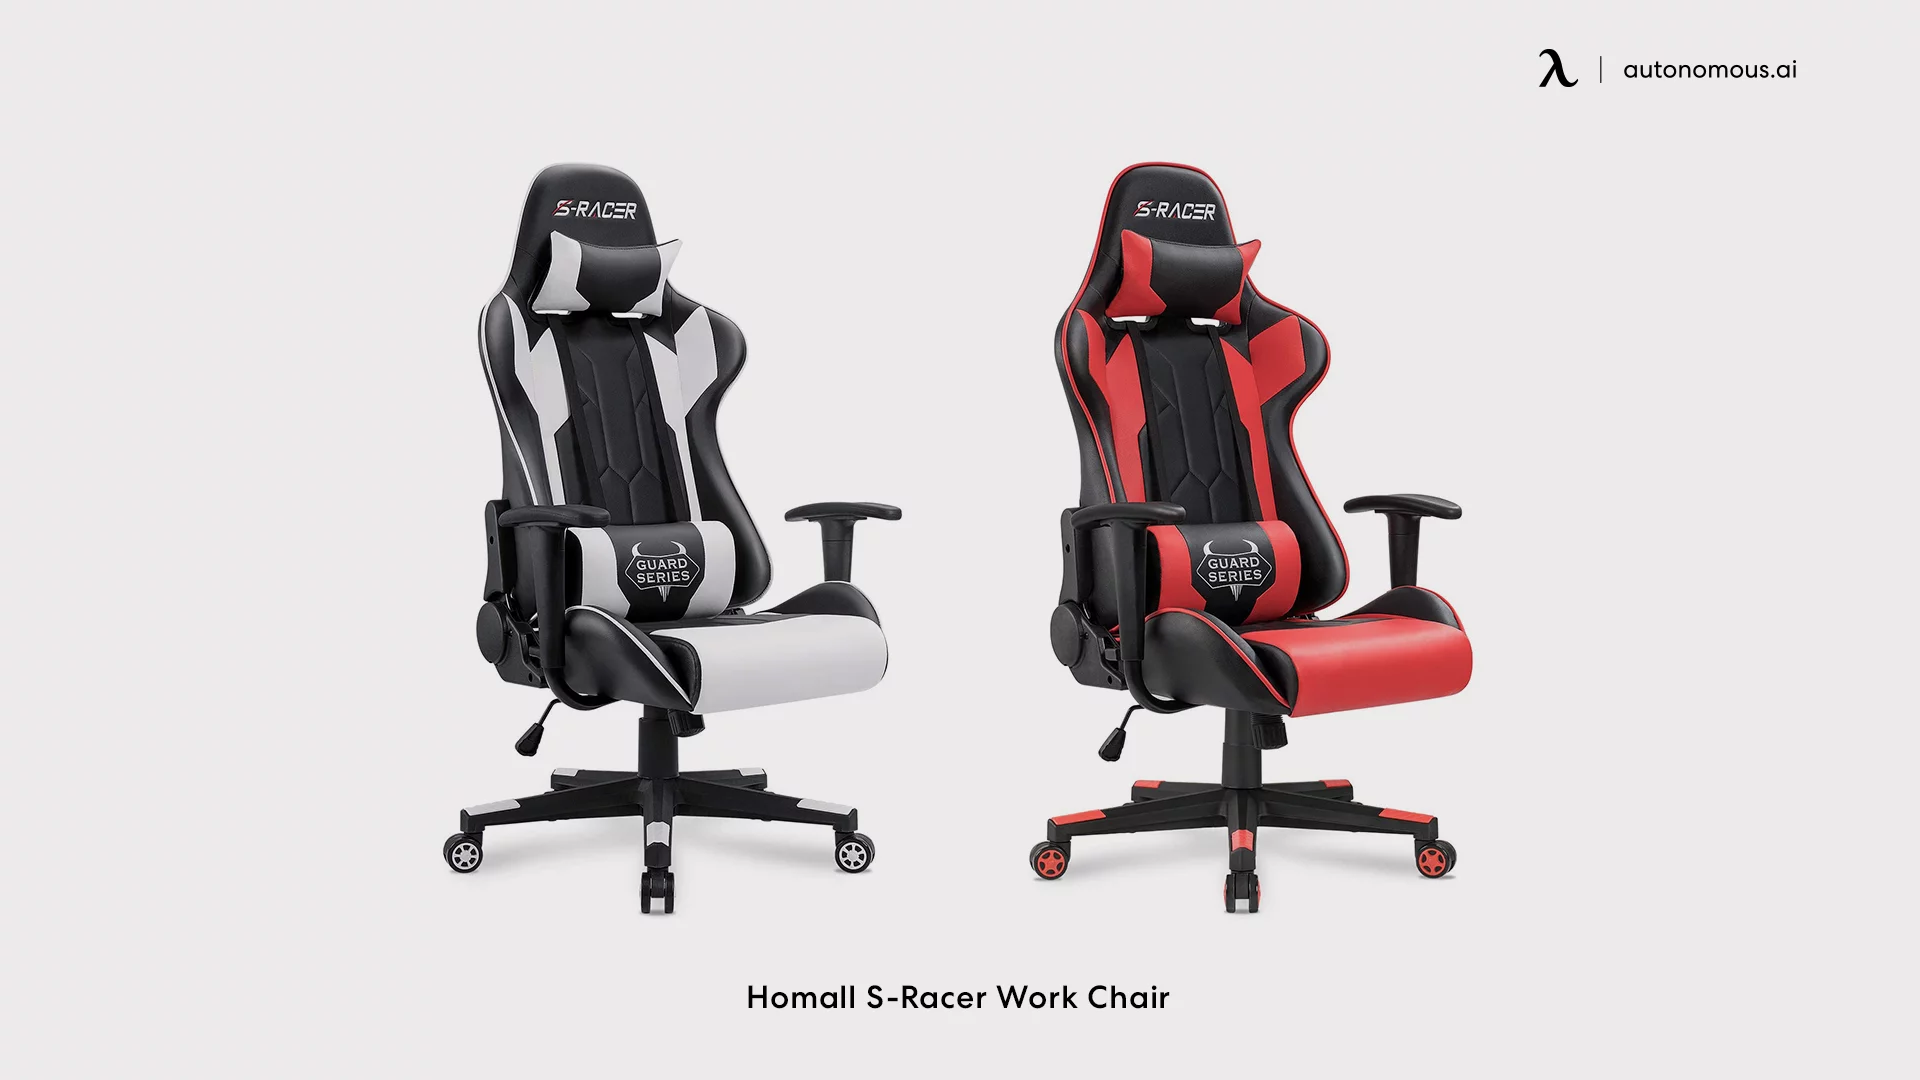 Homall S-Racer most comfortable office chair